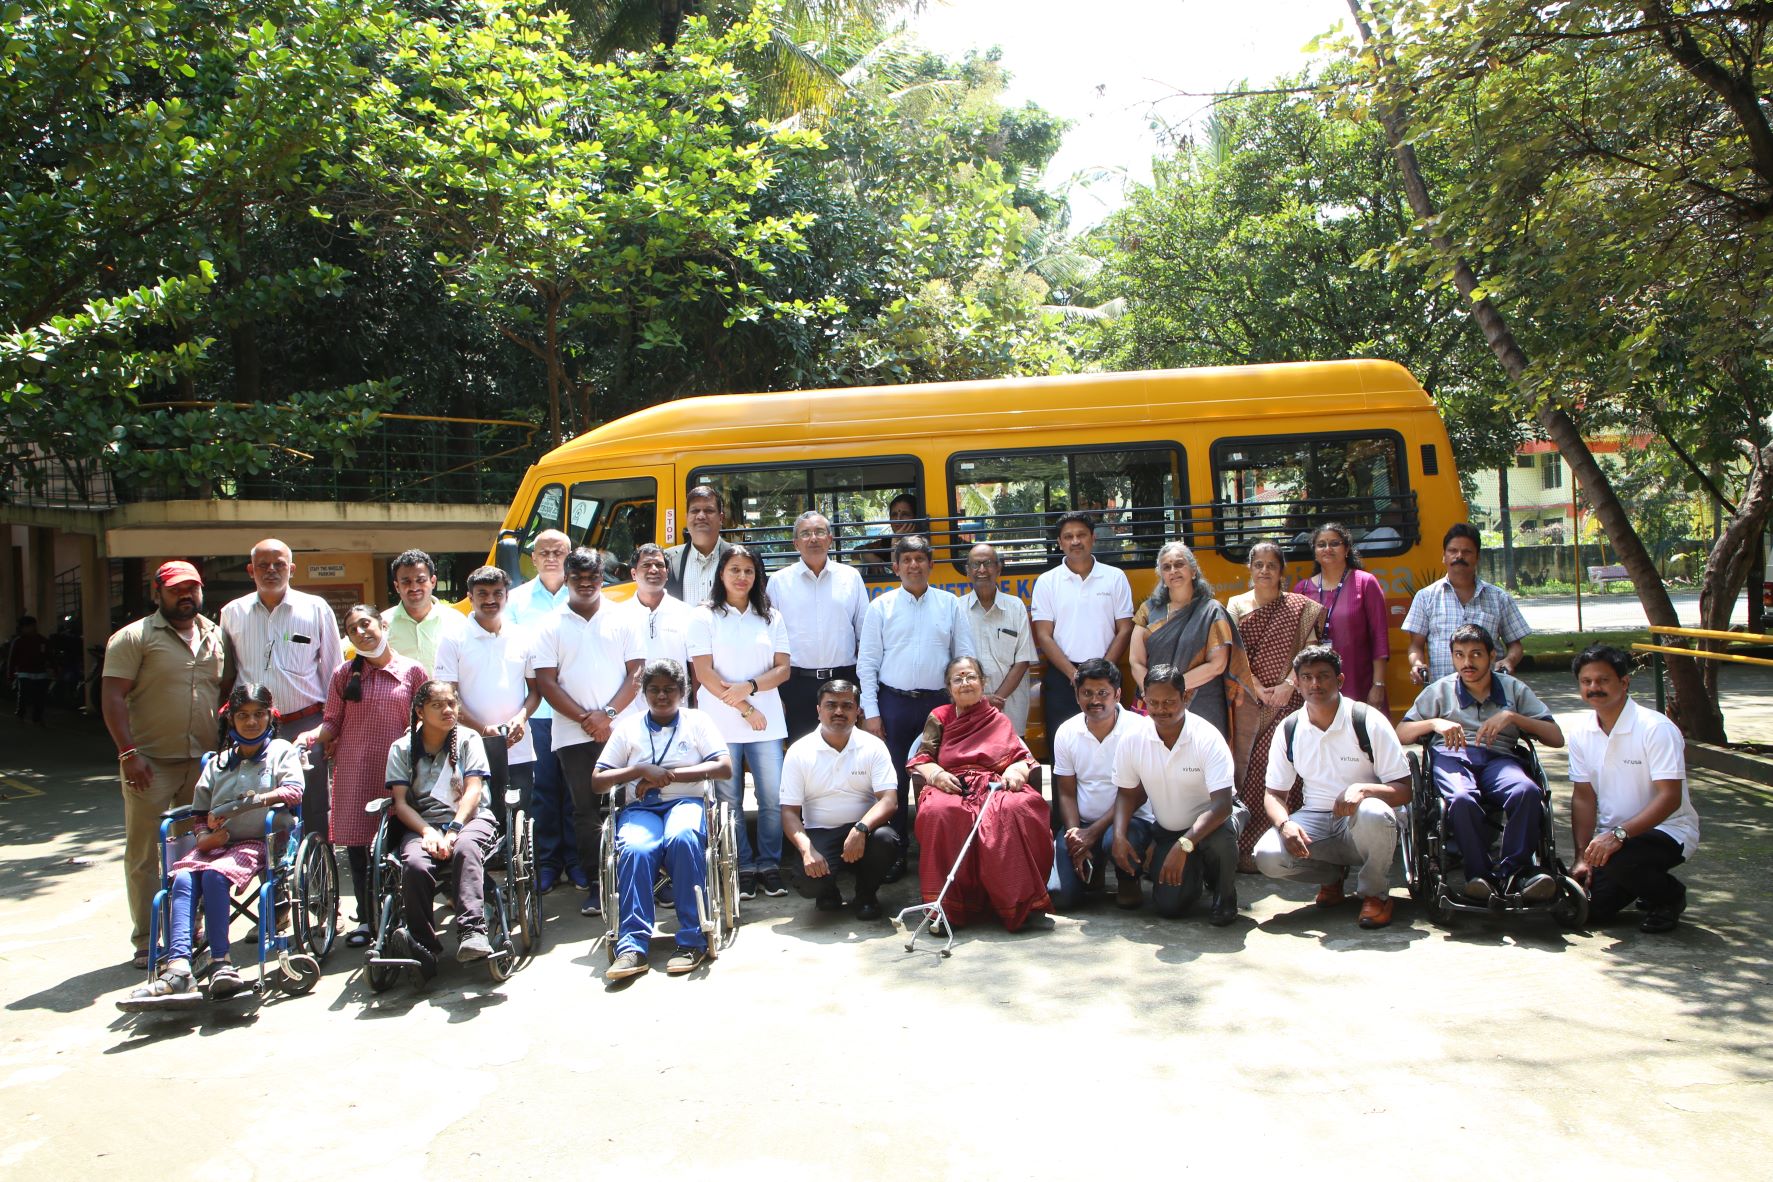 Virtusa extends support to Spastics Society of Karnataka, provisions mobility requirements of children with special needs